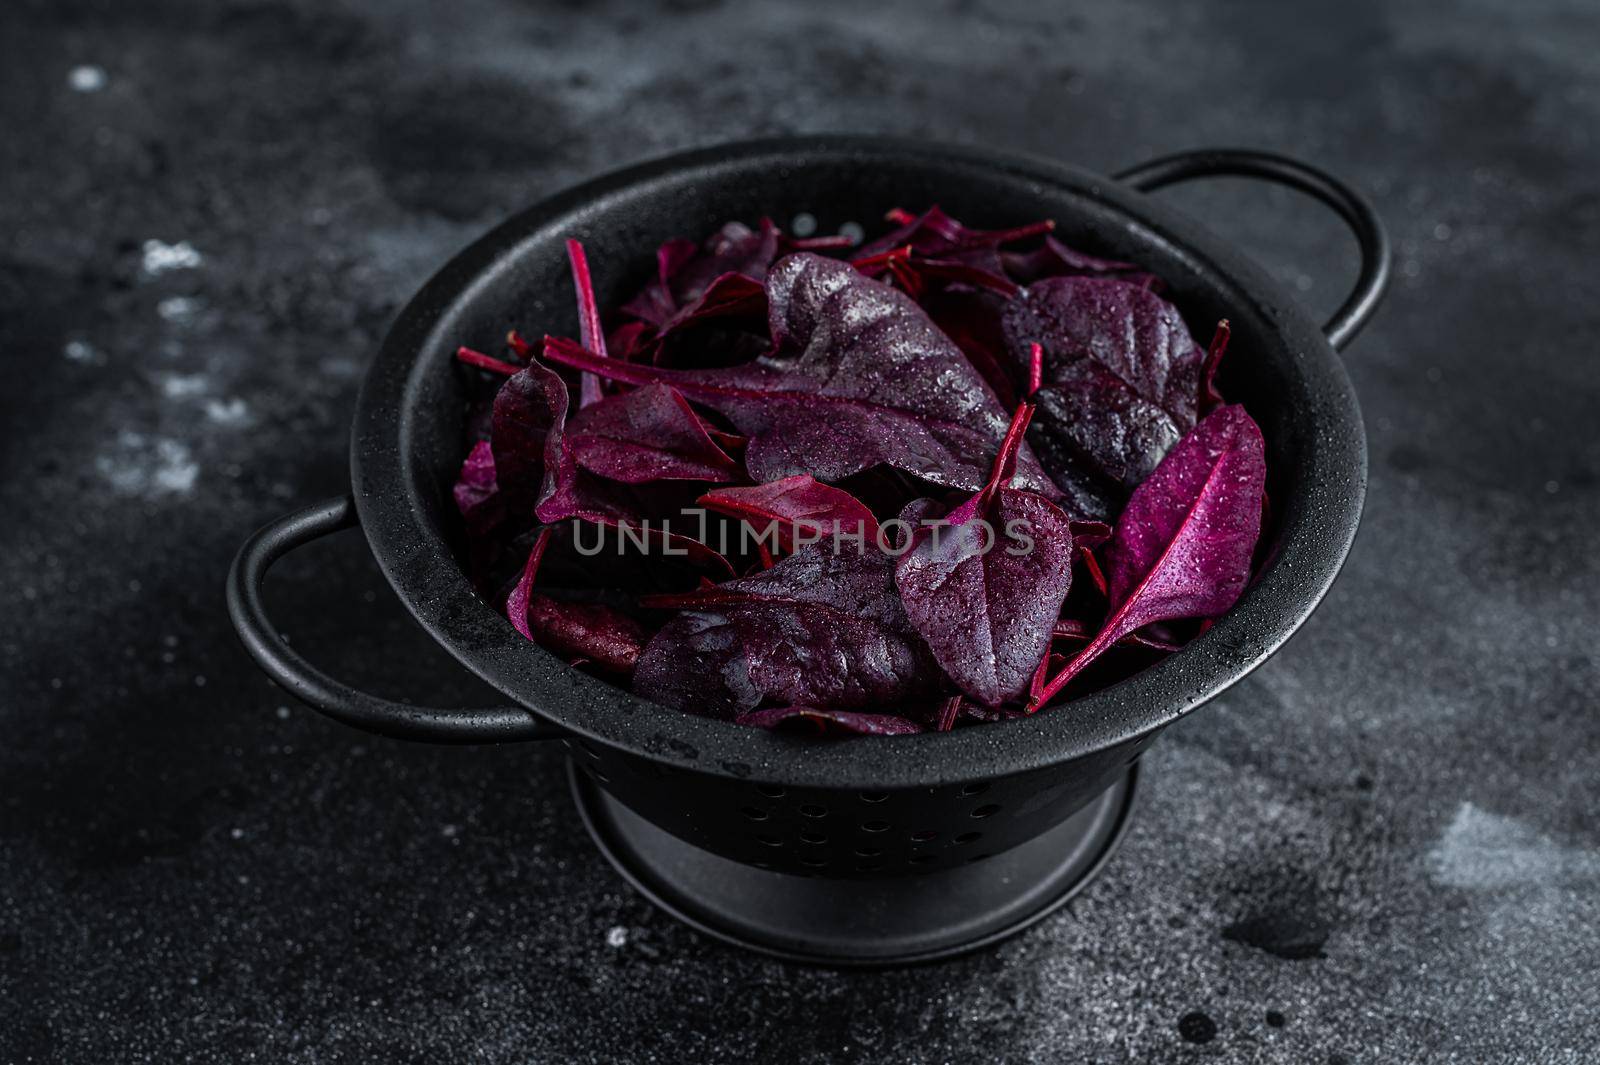 Leaves of Swiss red chard or Mangold salad in a colander. Black background. Top view by Composter